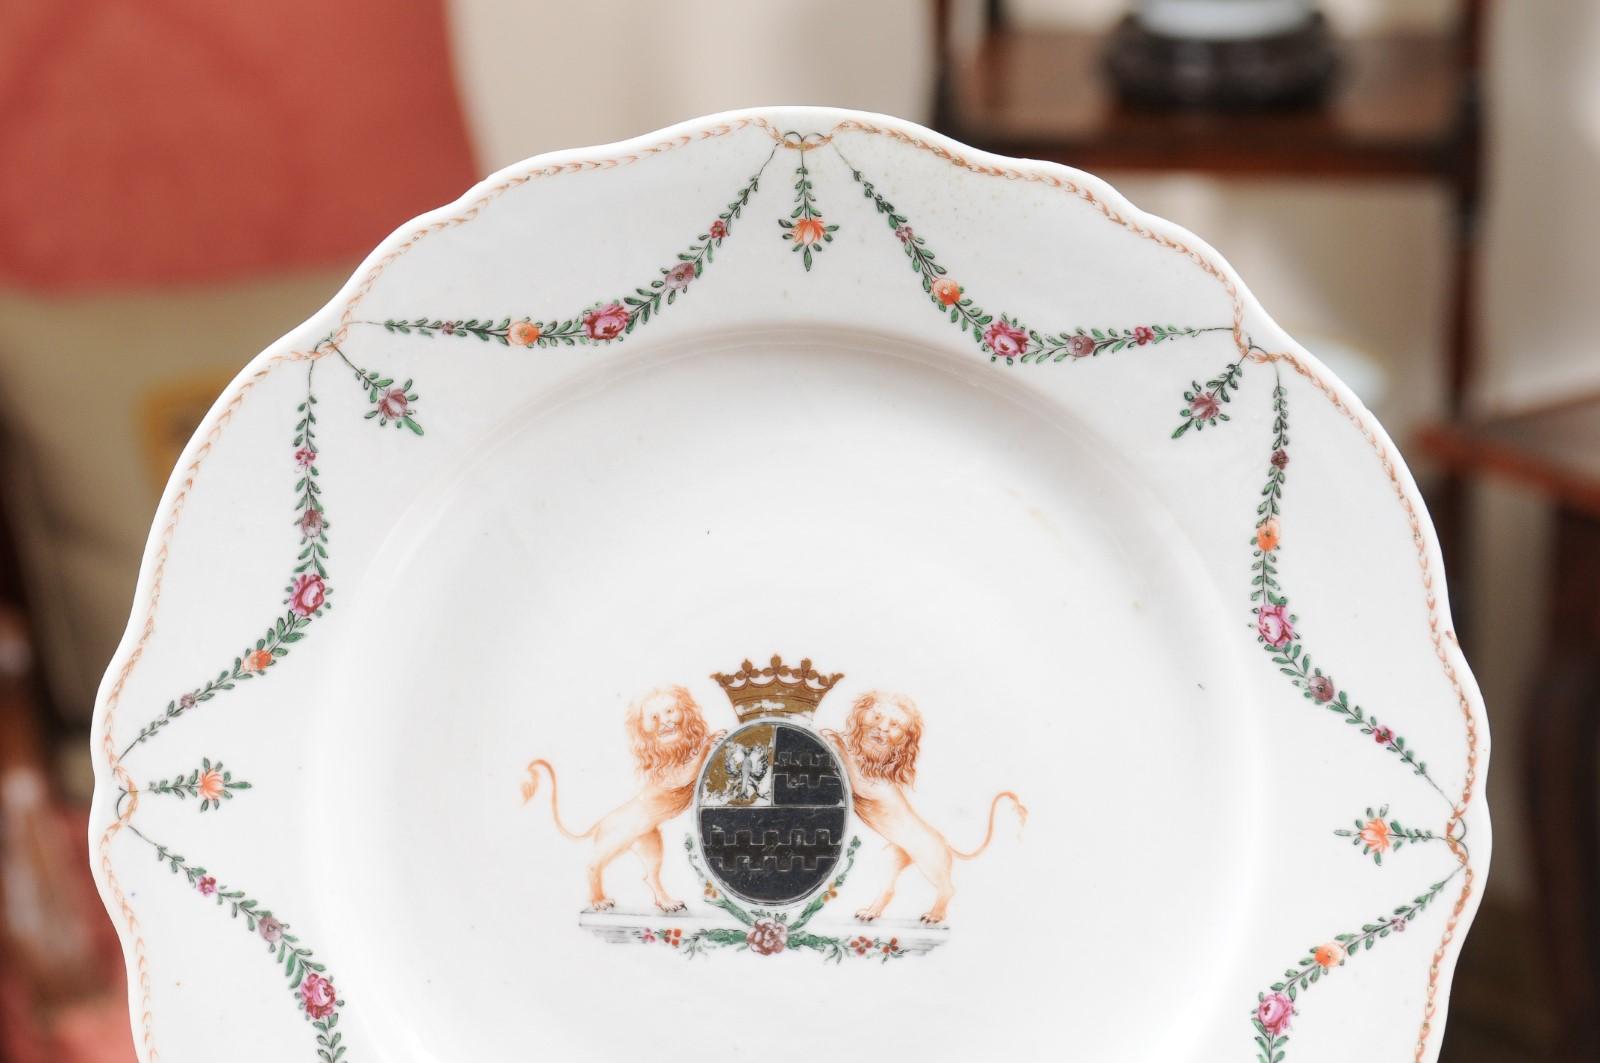 18th Century Chinese Export Porcelain Cake Plate / Charger with Armorial Crest For Sale 1